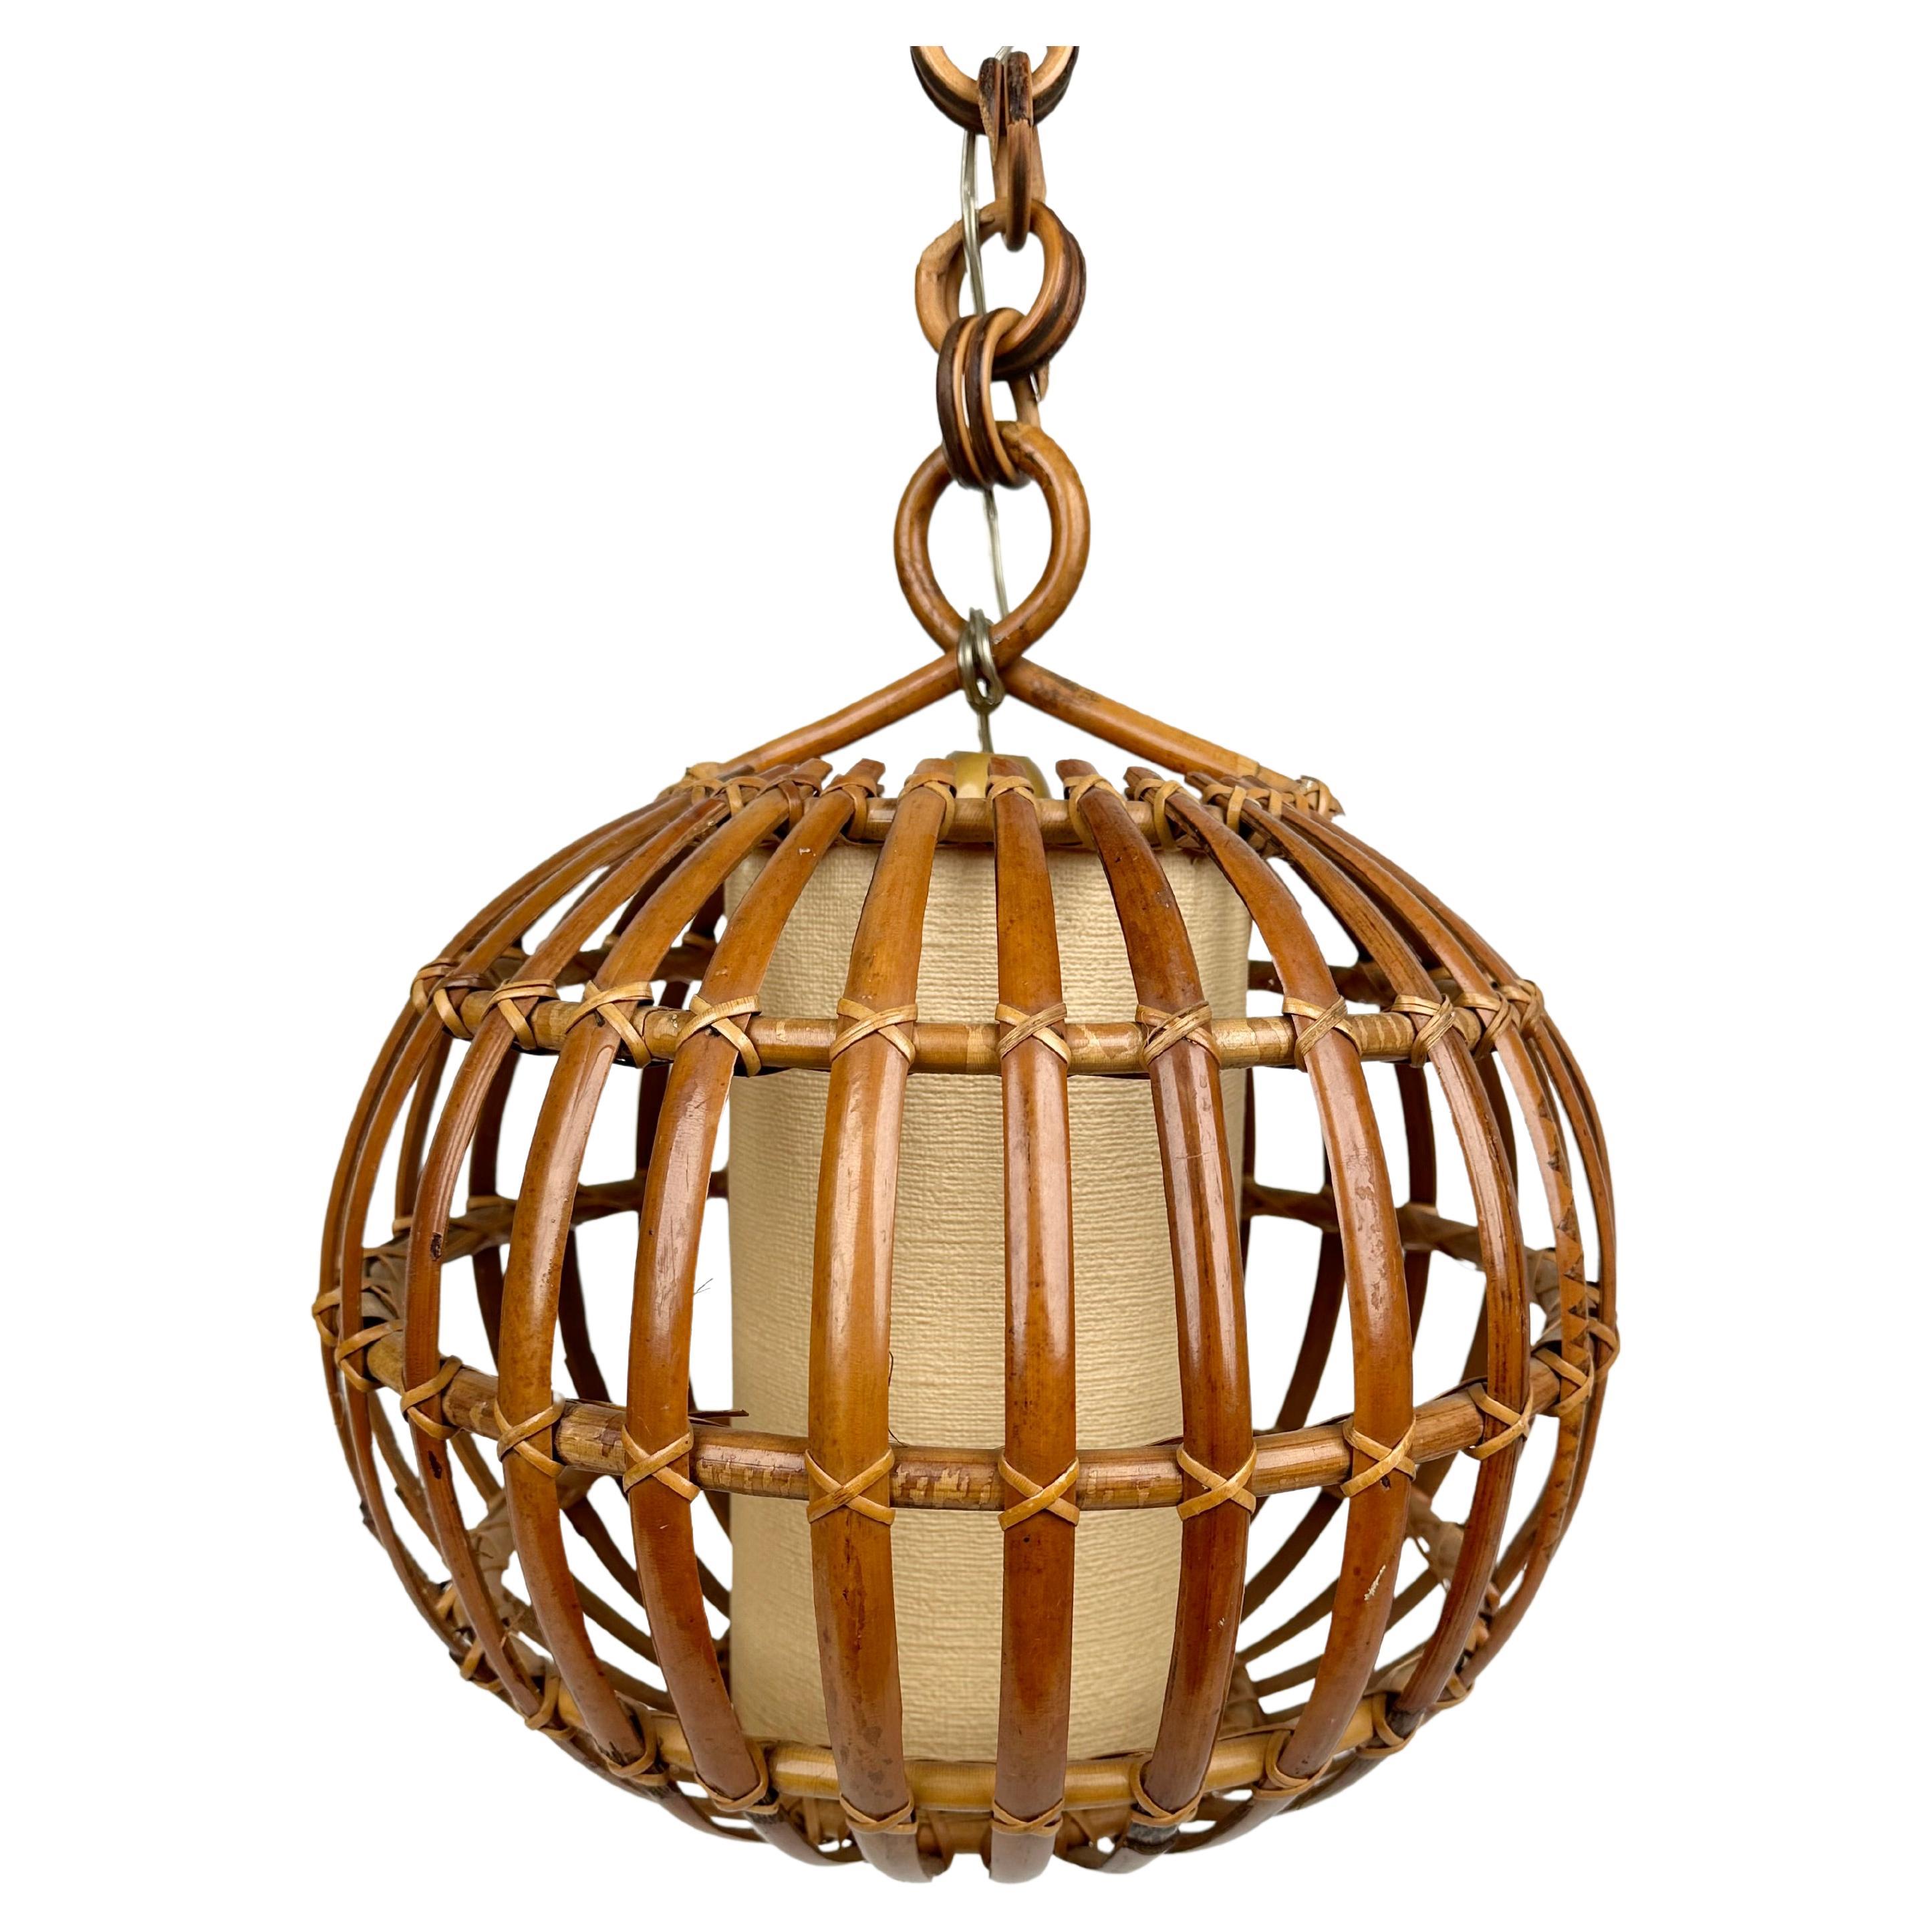 Midcentury lantern in rattan and bamboo with globe or ball shaped lampshade. 

Made in Italy in the 1960s. 

This suspension lamp is entirely handcrafted with rattan and bamboo. The ball shaped shade hangs from a chain with round rattan links which